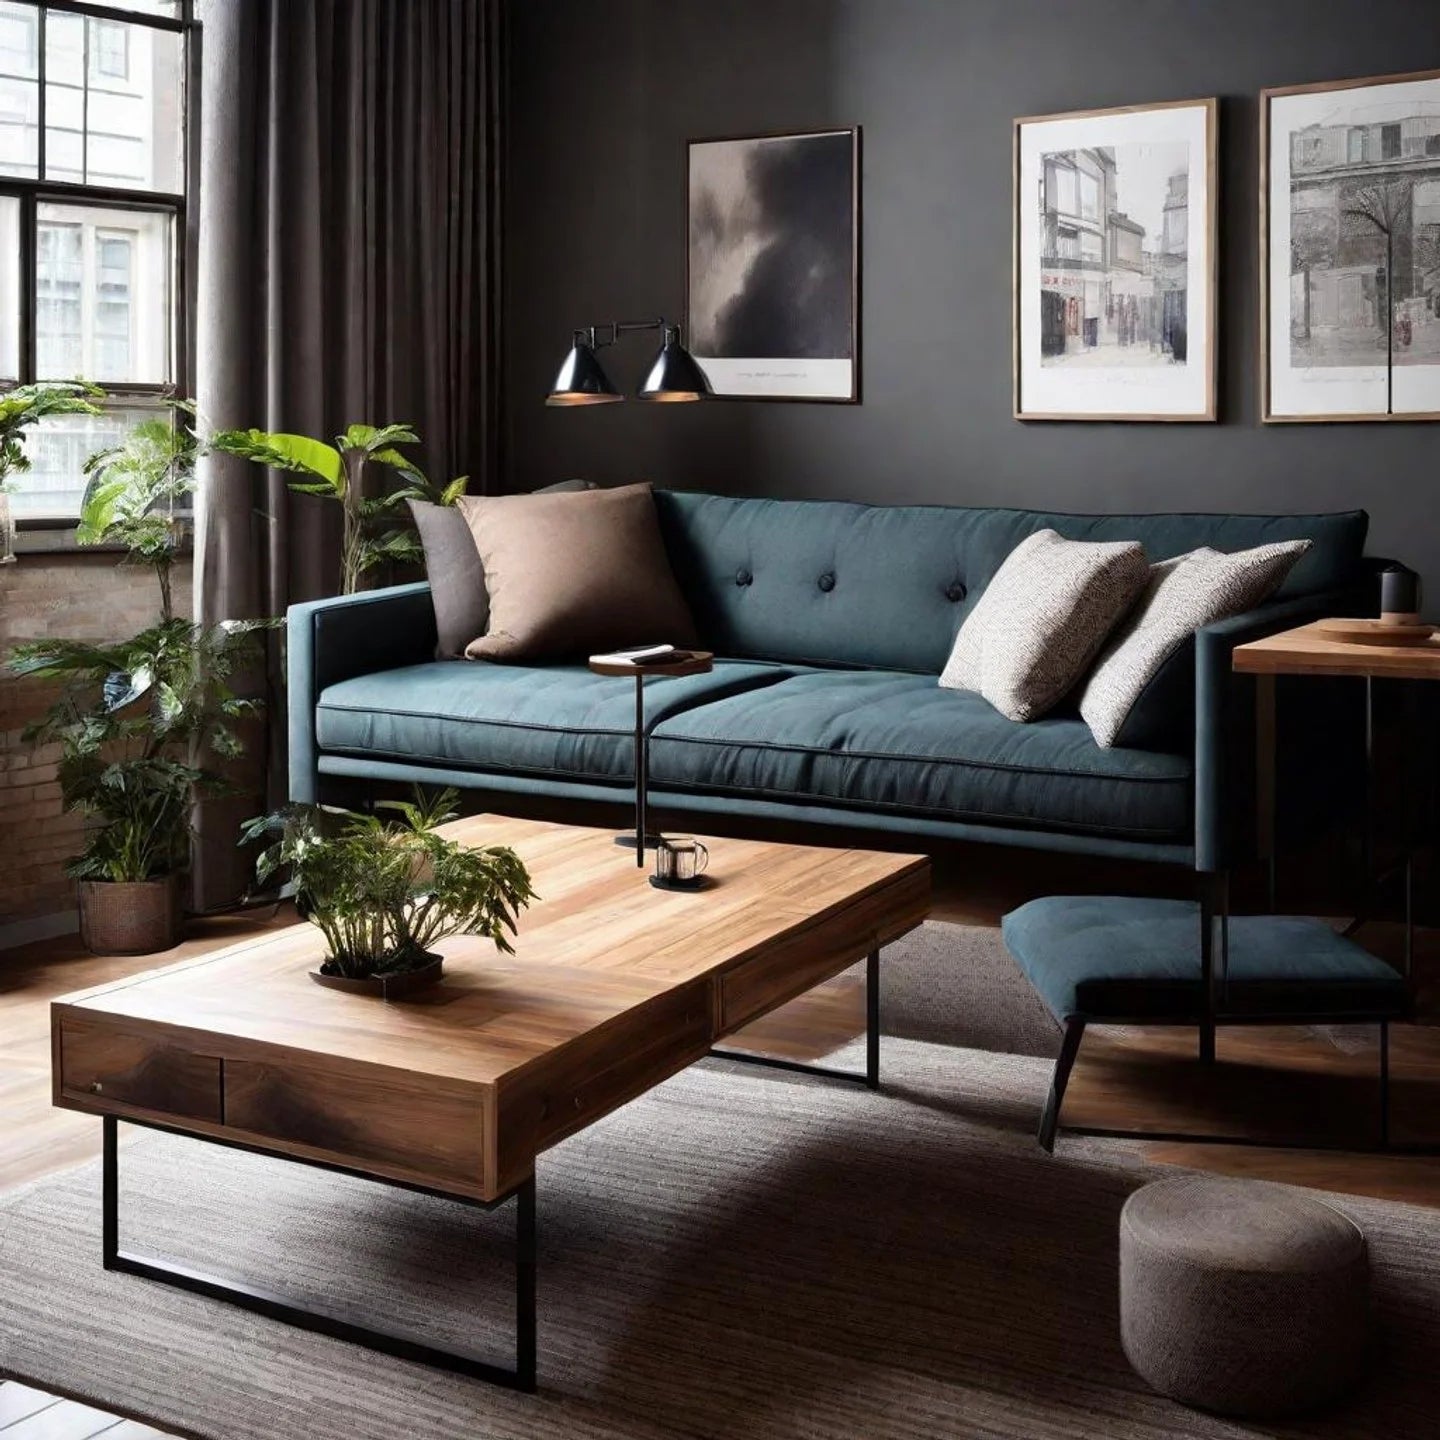 Choosing the Perfect Coffee Table: Should It Be Higher or Lower Than Your Sofa?